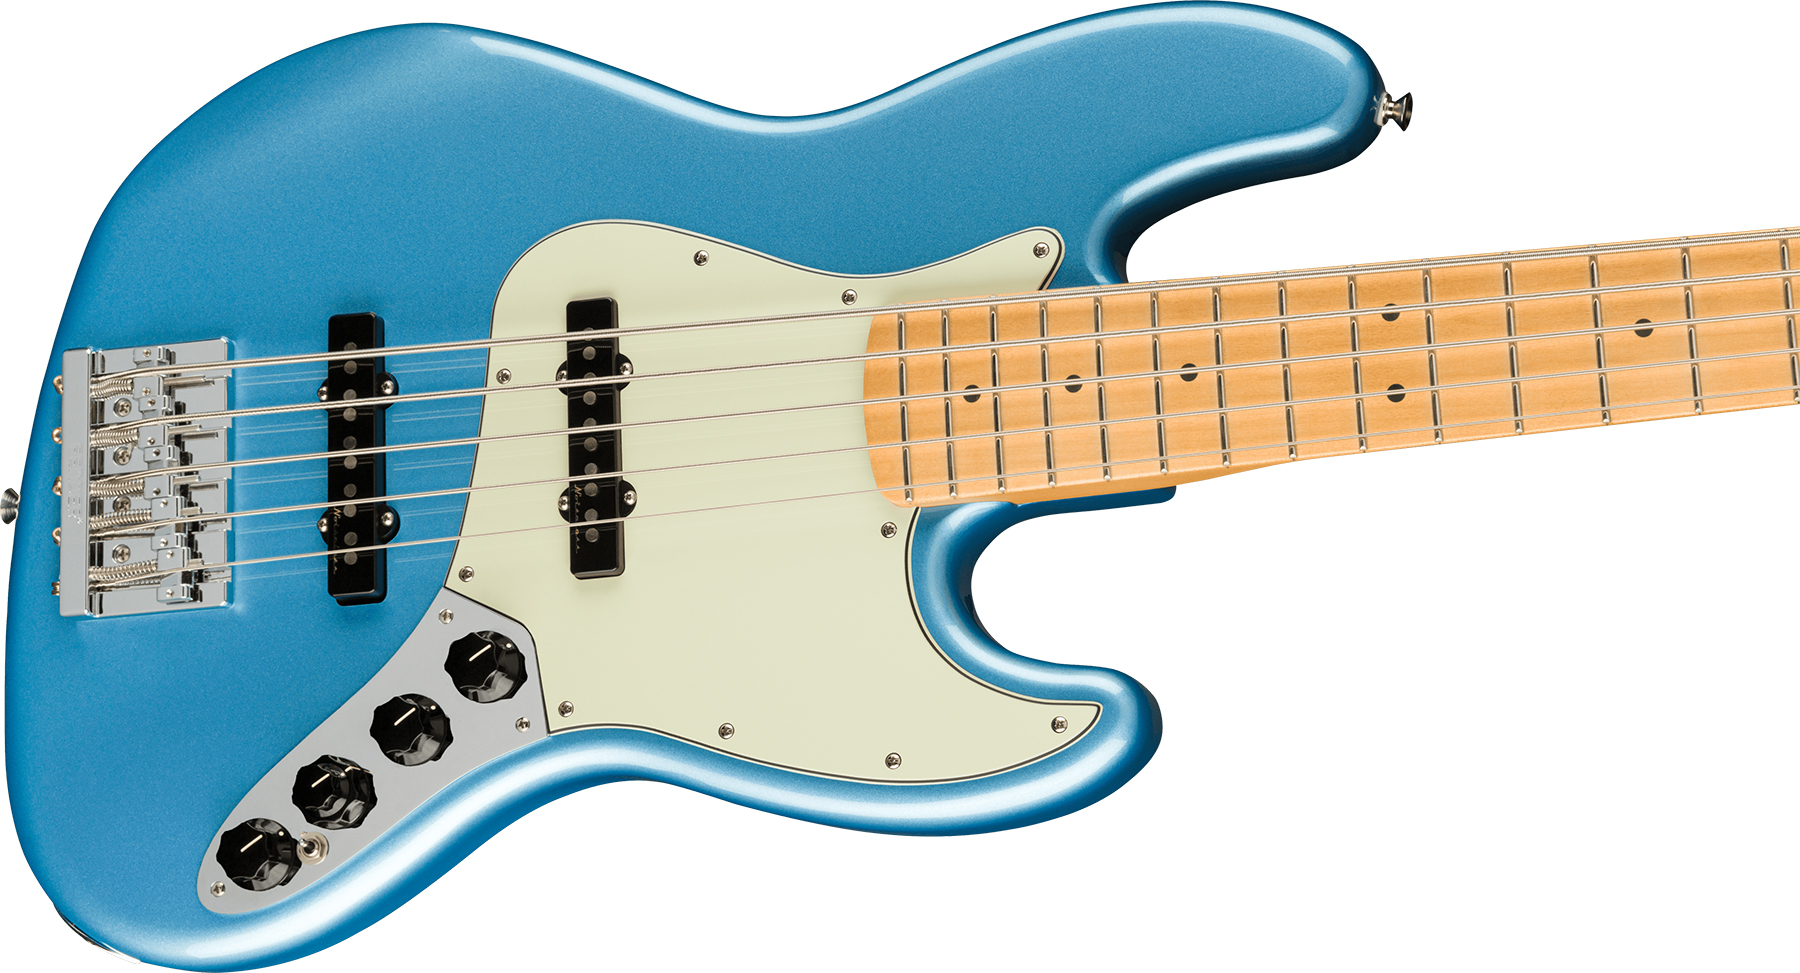 Fender Jazz Bass Player Plus V Mex 5c Active Mn - Opal Spark - Solid body electric bass - Variation 2